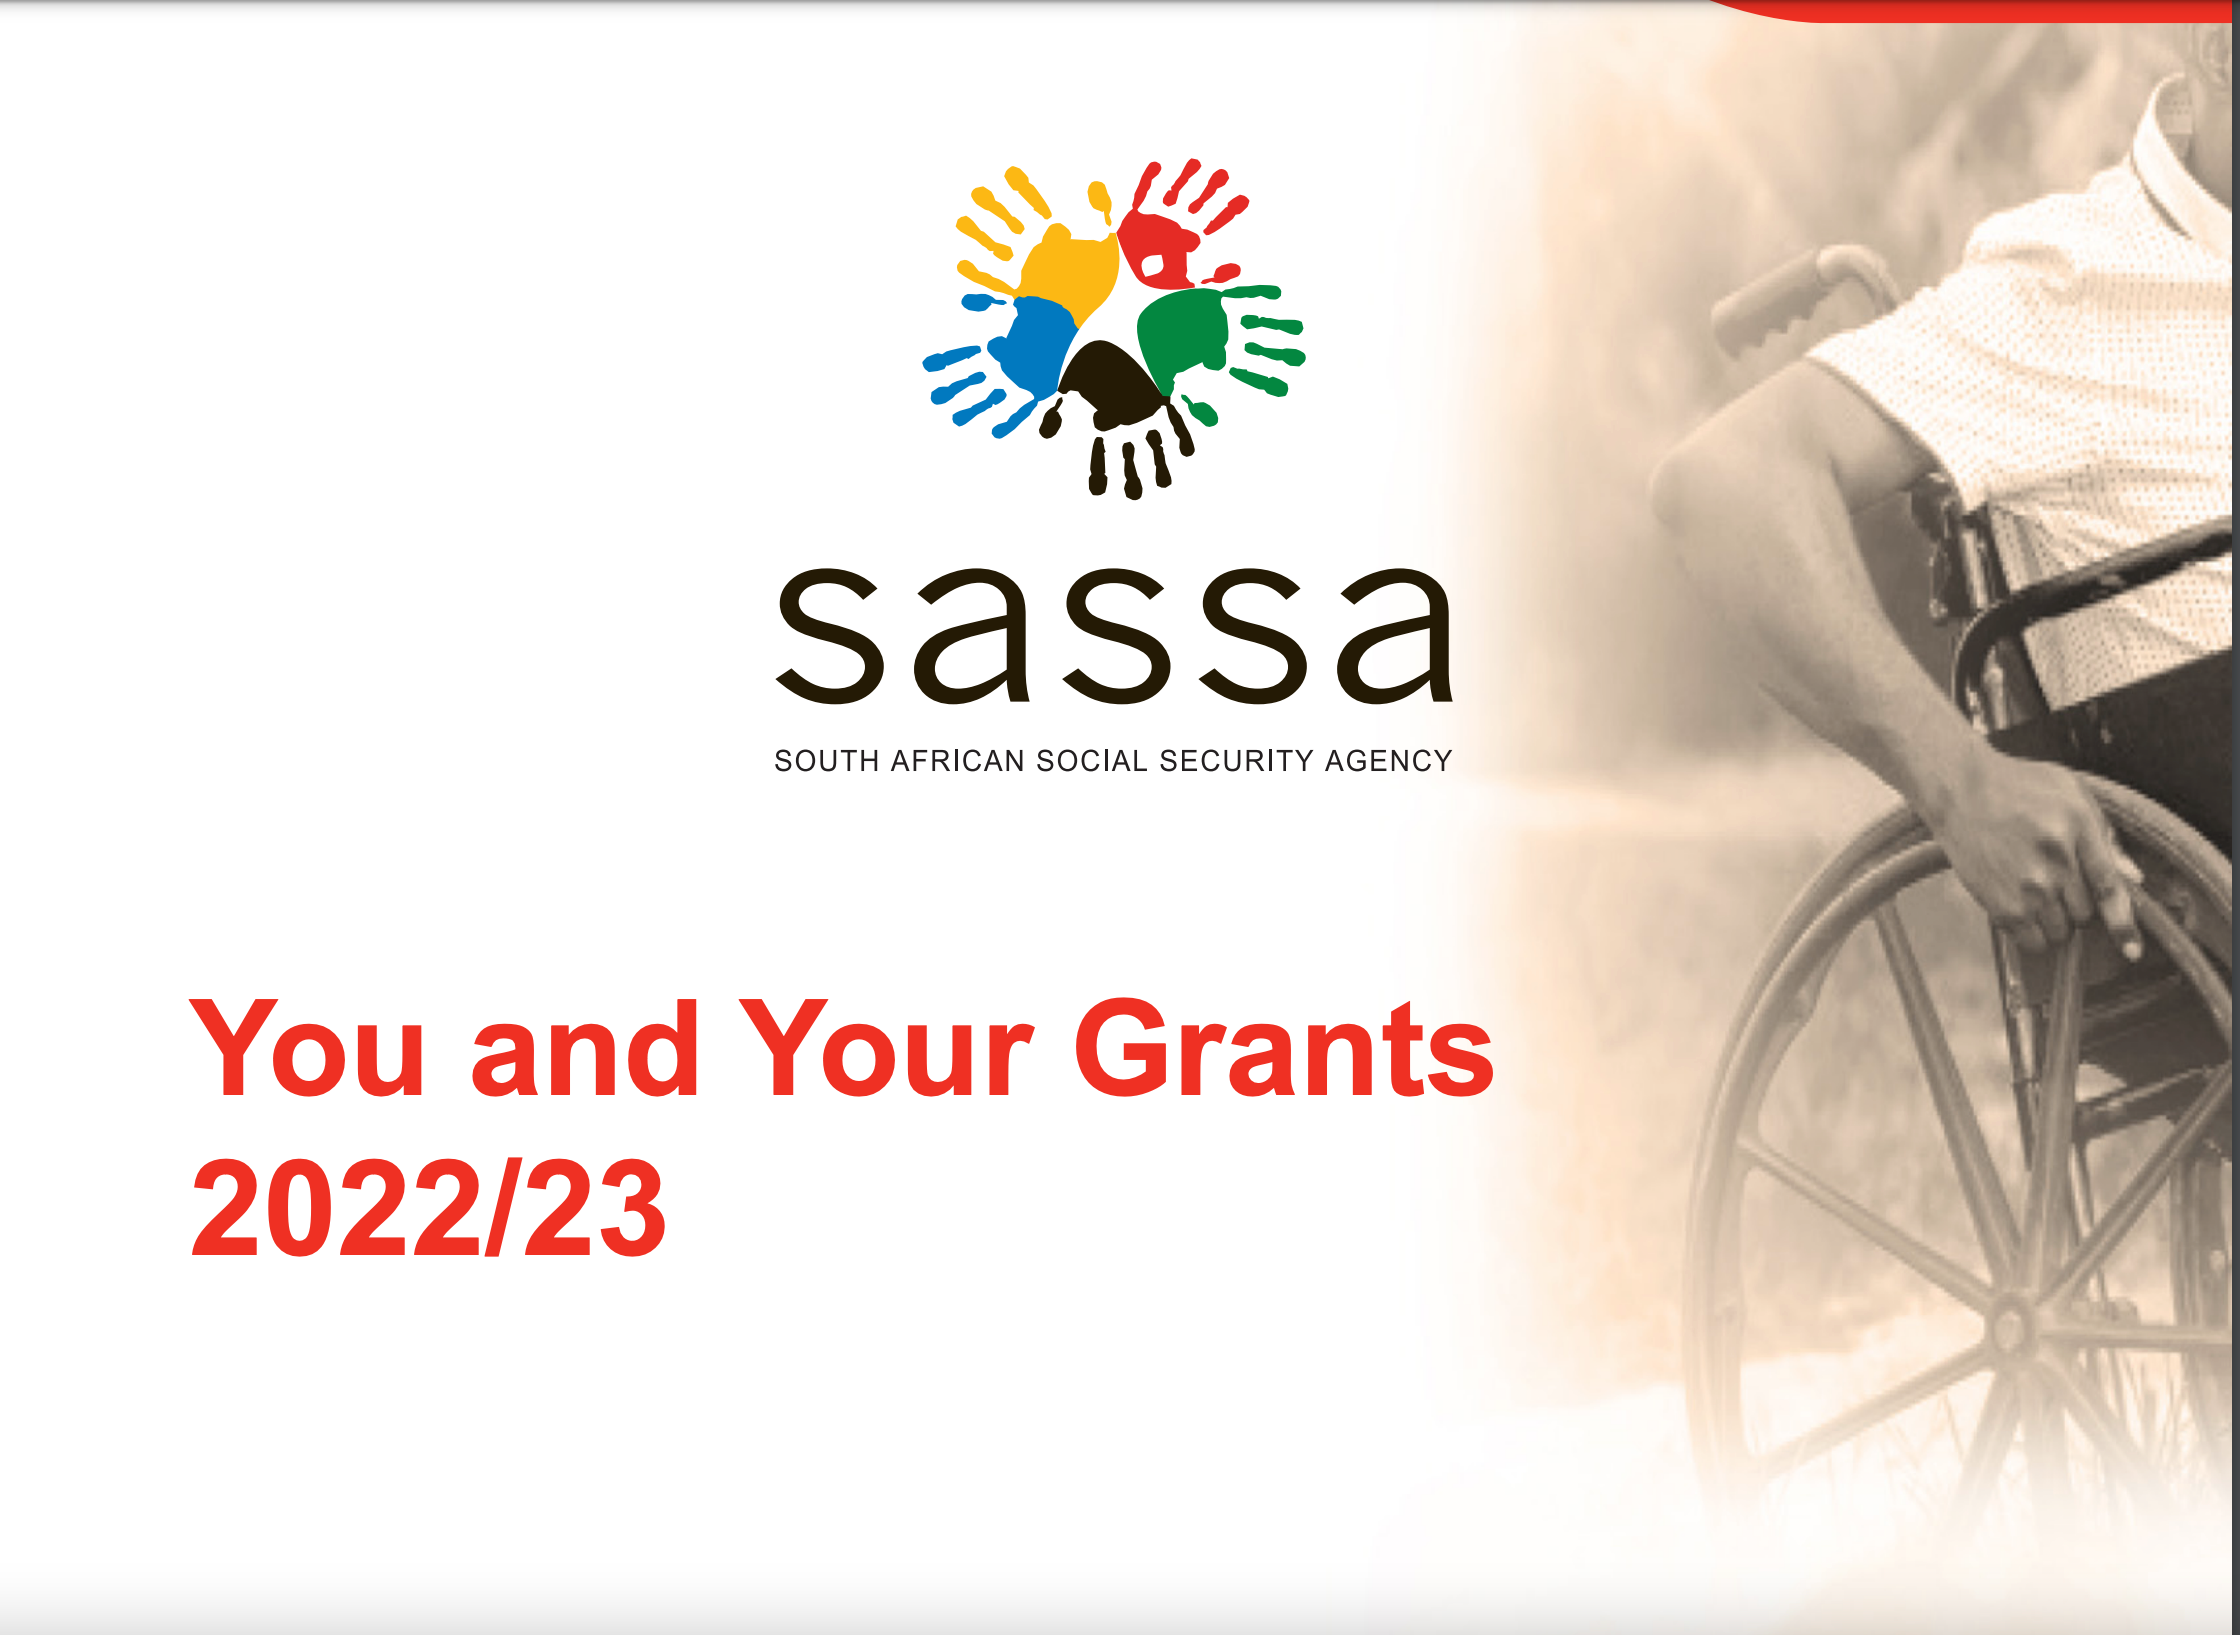 SASSA SRD Grant 2022:2023 Application - You and Your Grants